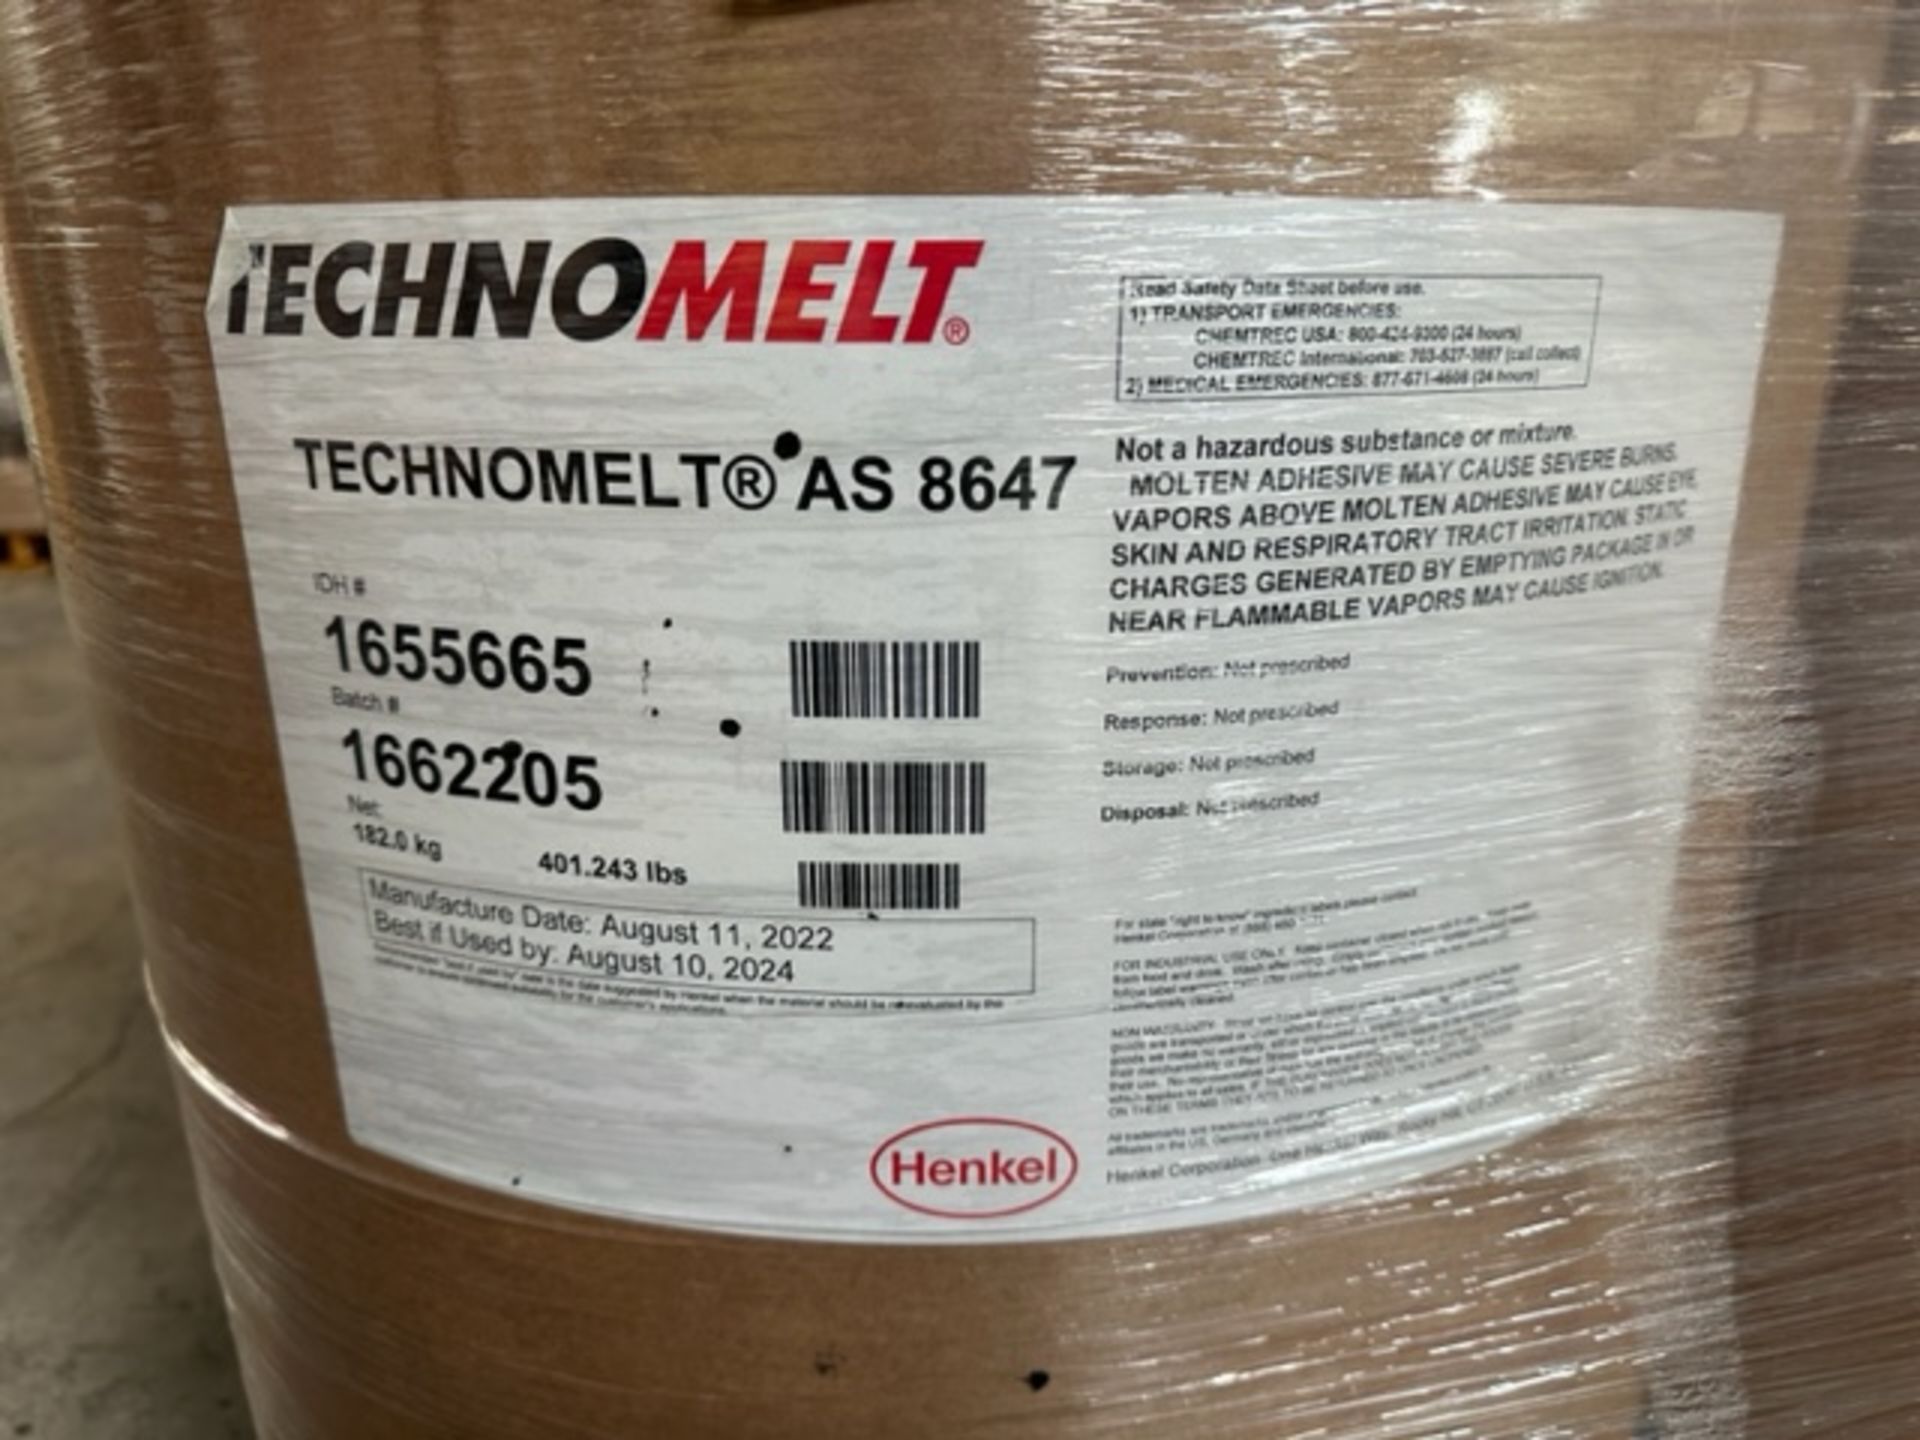 LOT - (4) 55-GALLON DRUMS OF HENKEL TECHNOMELT AS 8647, FACTORY SEALED - UNUSED ADHESIVES - Image 2 of 2